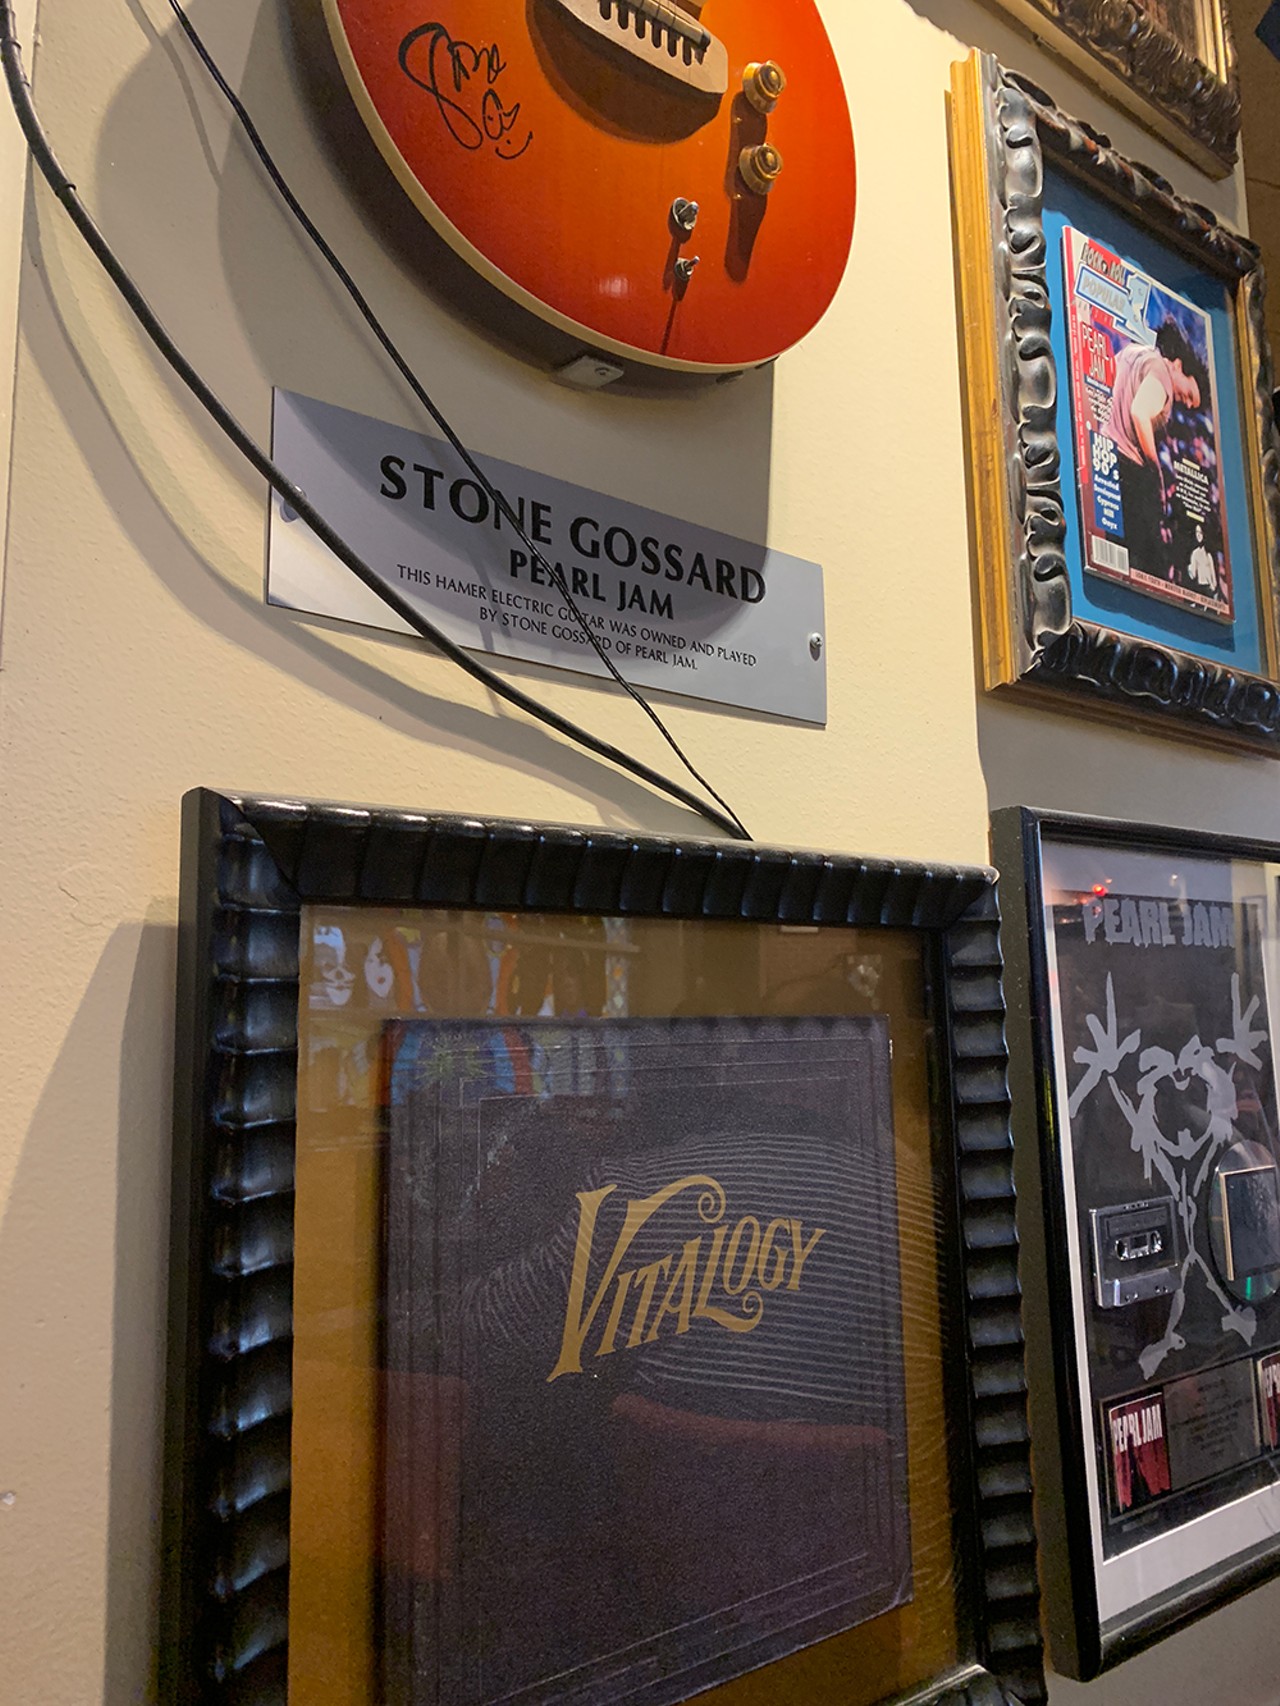 One last look at the memorabilia at Detroit's Hard Rock Cafe before it closes